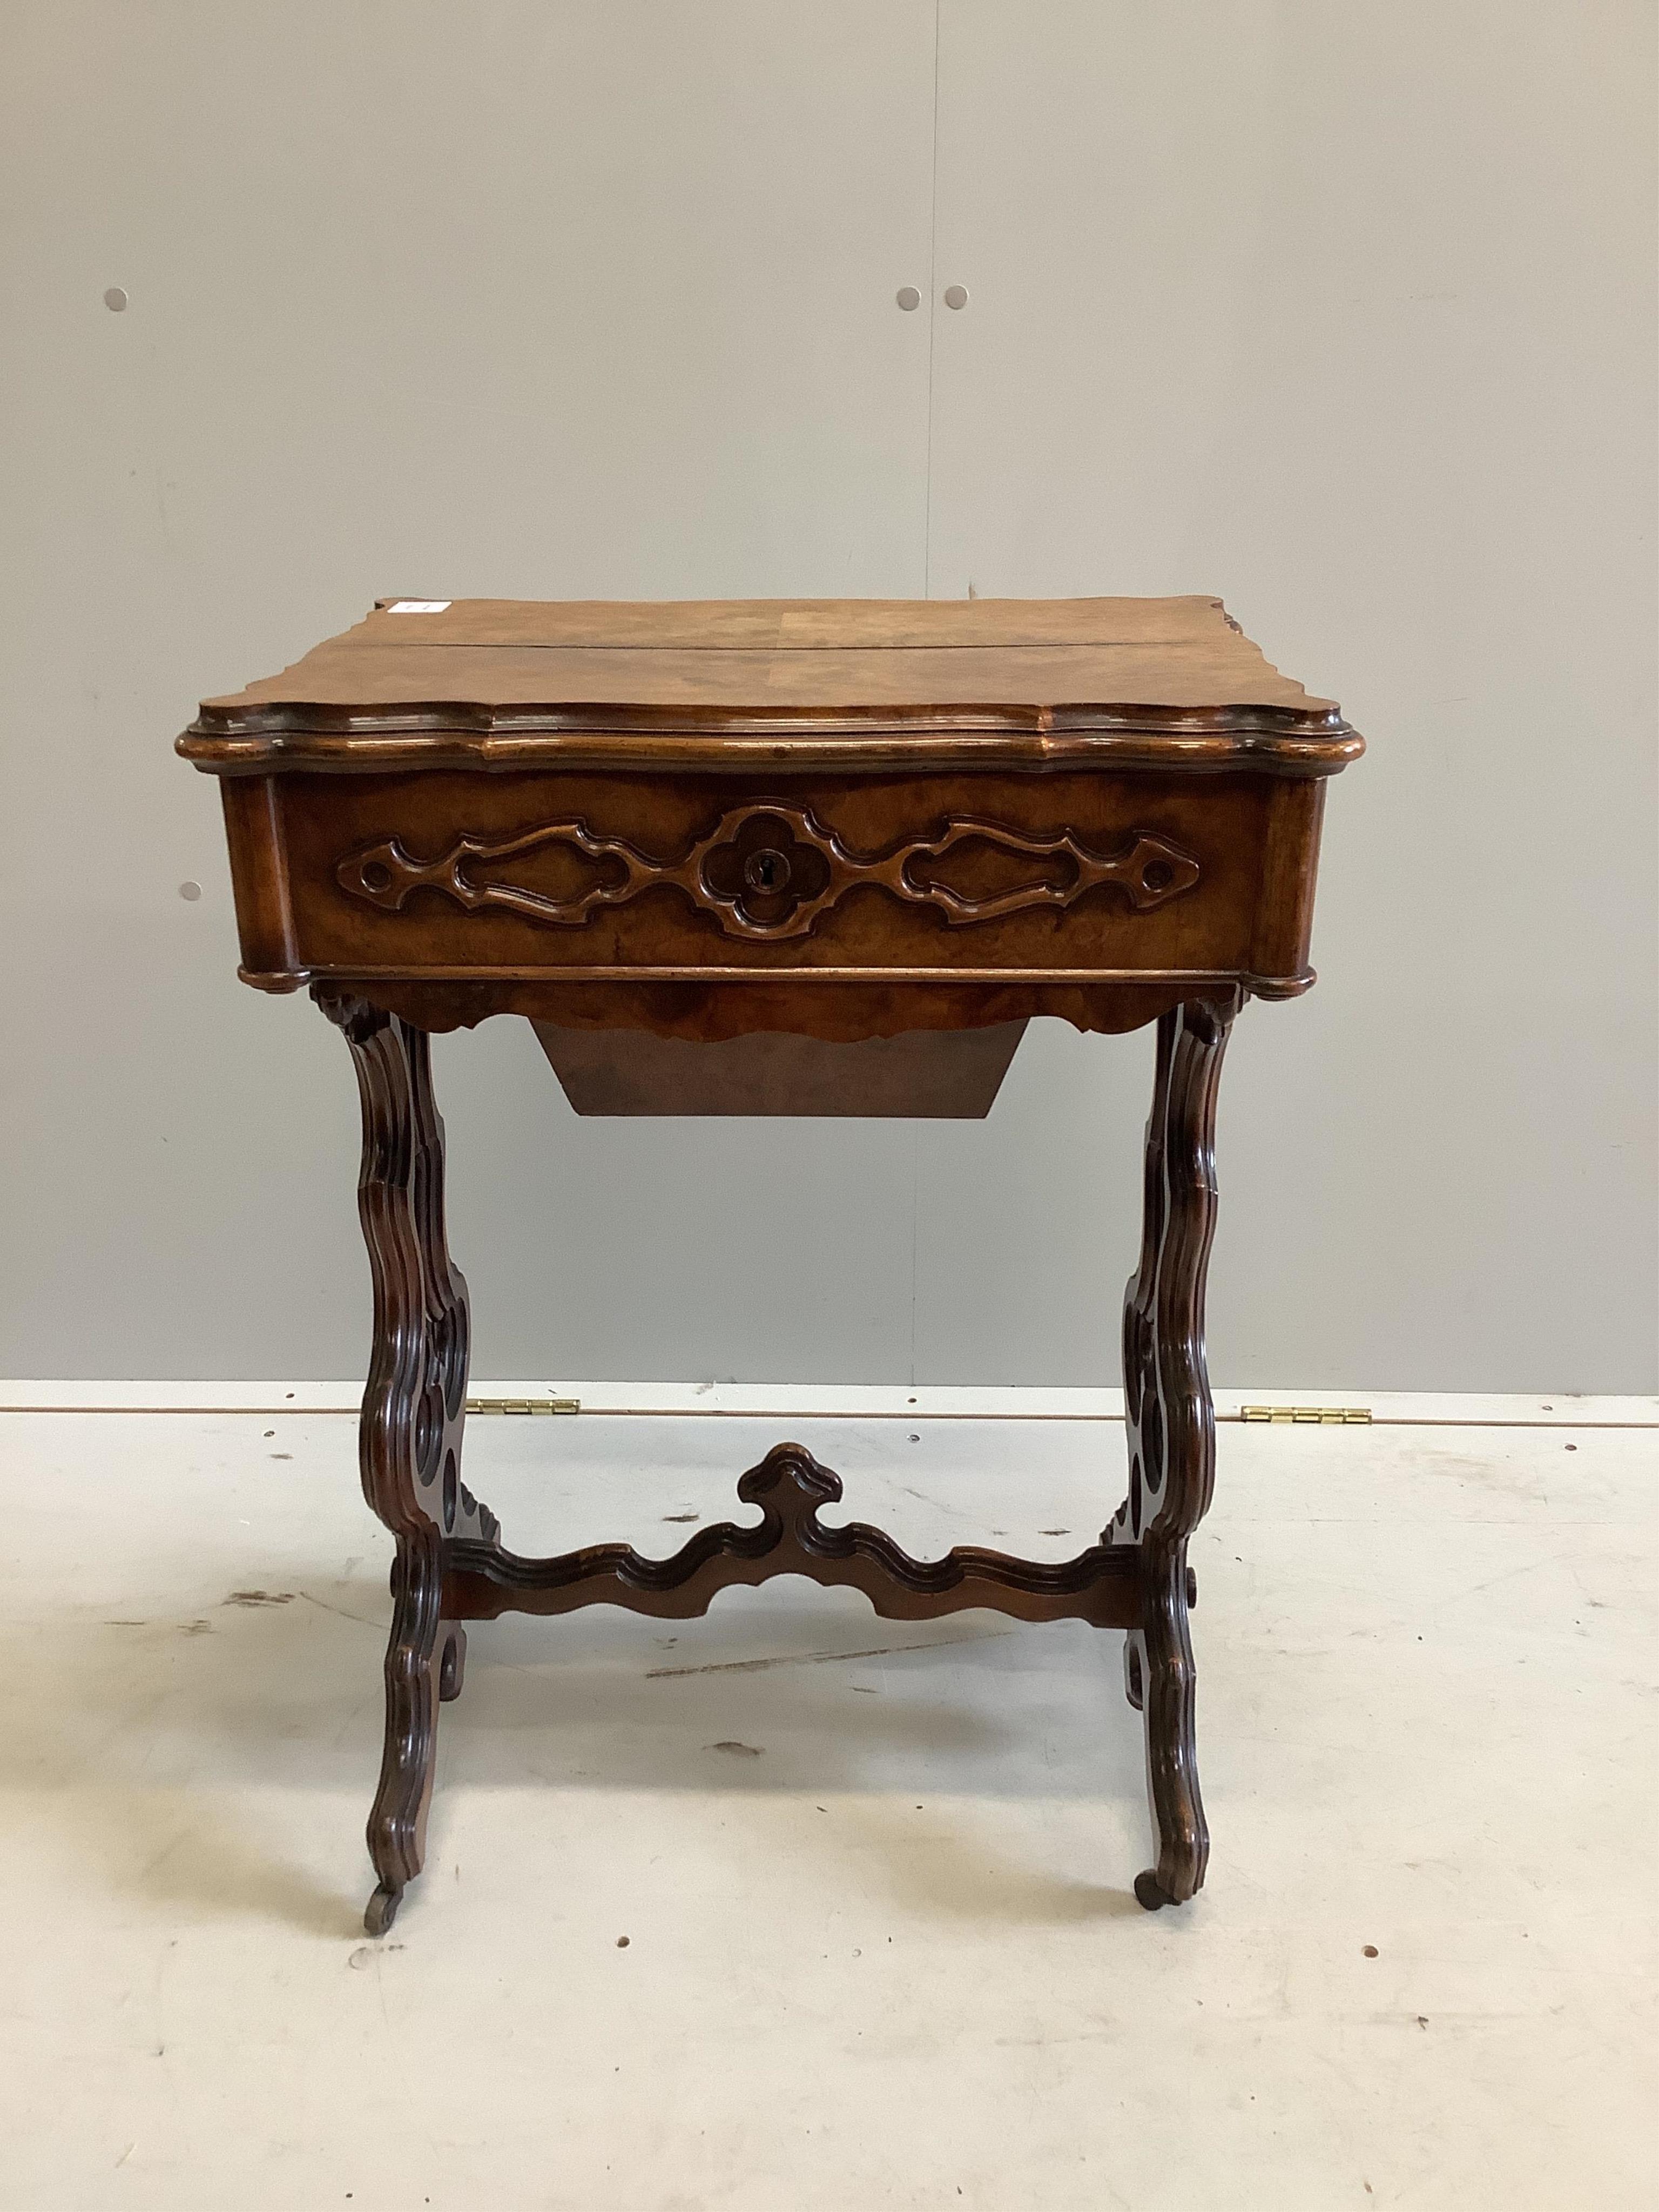 A 19th century French walnut work table, width 55cm, depth 39cm, height 73cm. Condition - poor